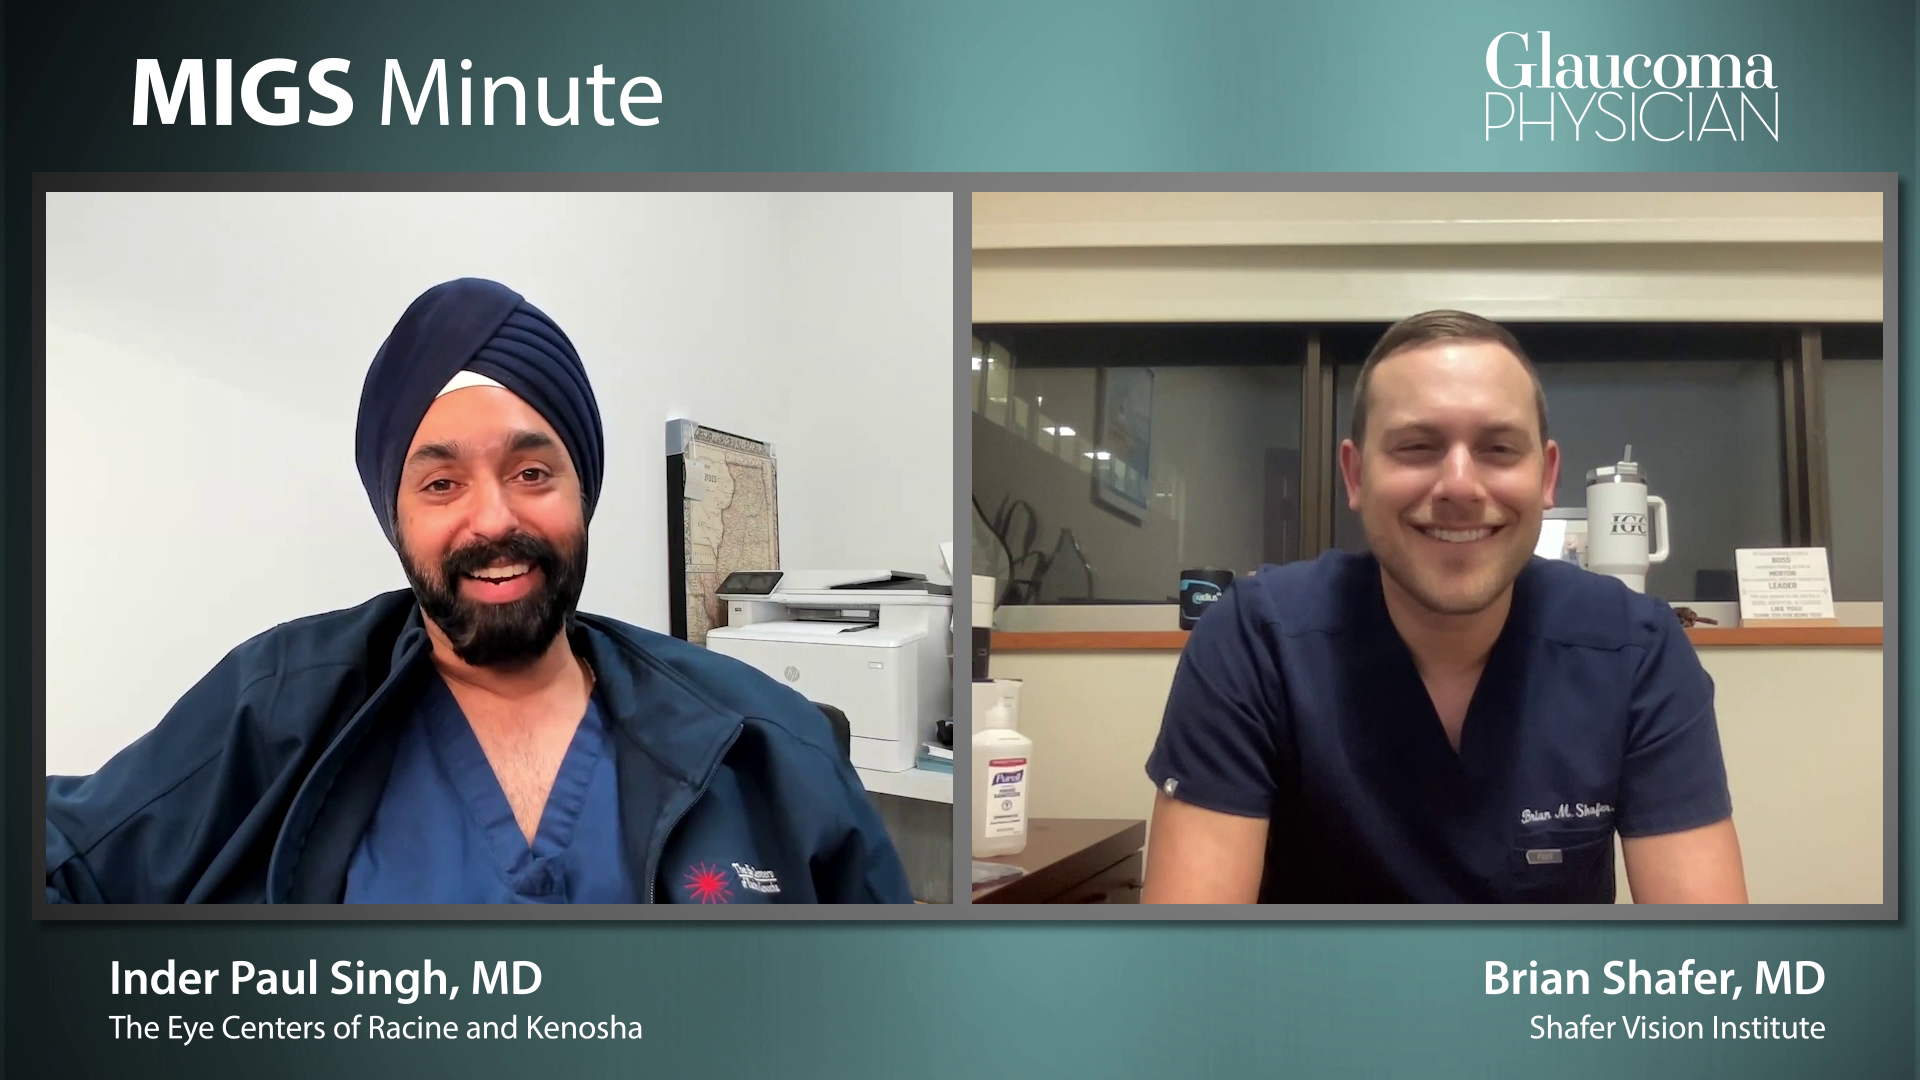 Episode 15: Inder Paul Singh, MD, and Brian Shafer, MD, discuss interventional glaucoma and patient compliance.